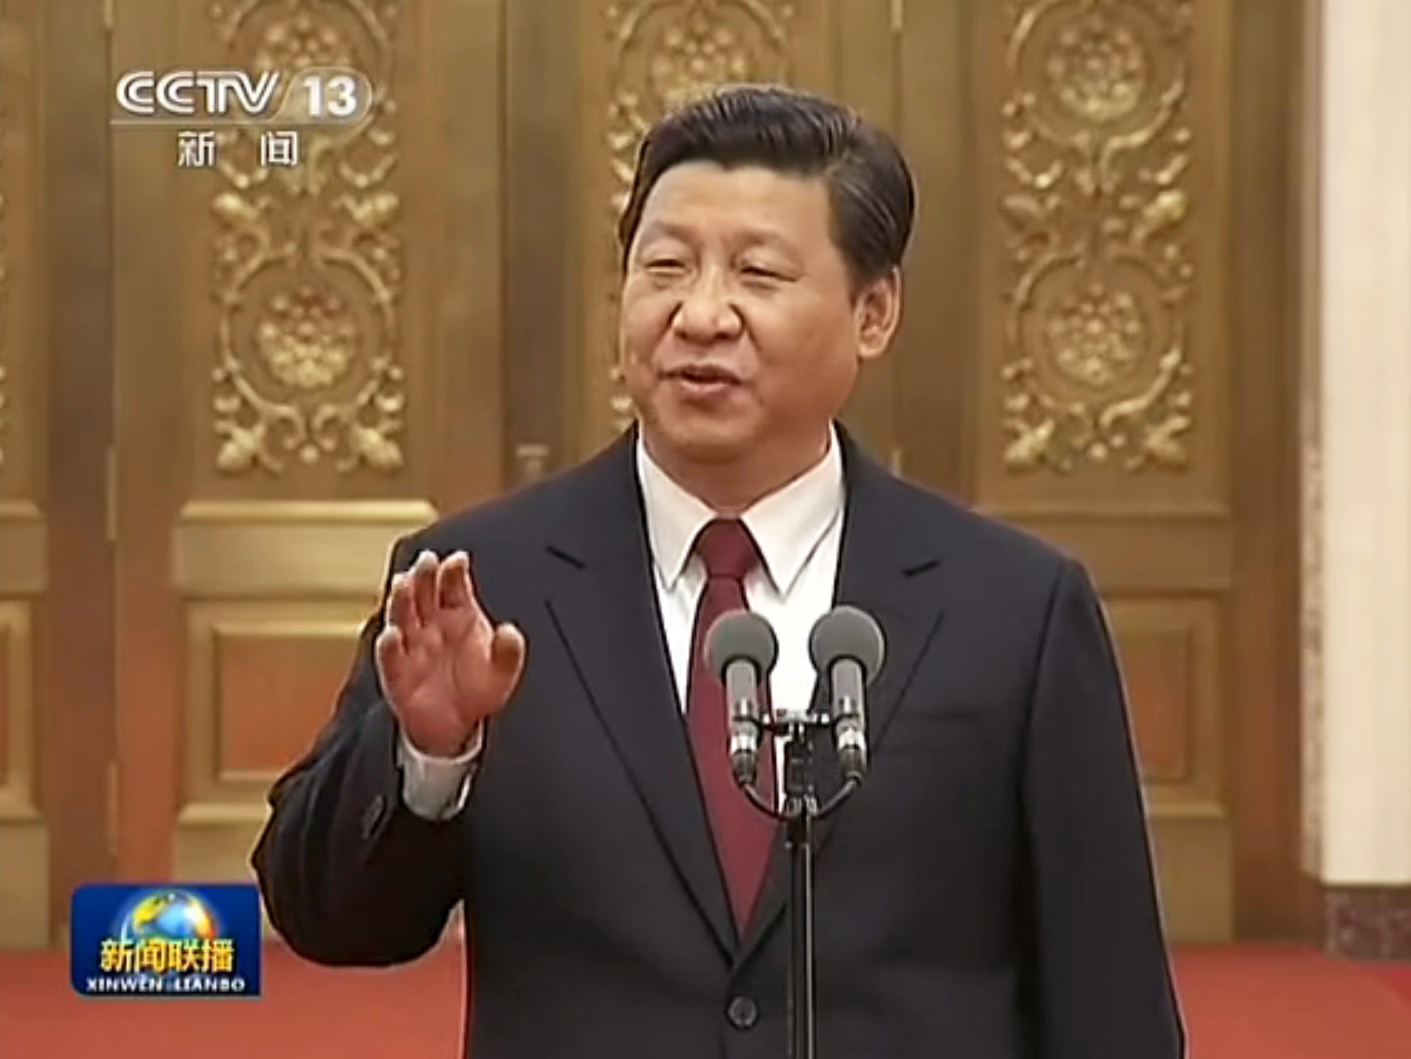 Xi Jinping delivers speaks to space scientists and engineers at the Great Hall of the People in Beijing, on Monday. Screenshot from CCTV